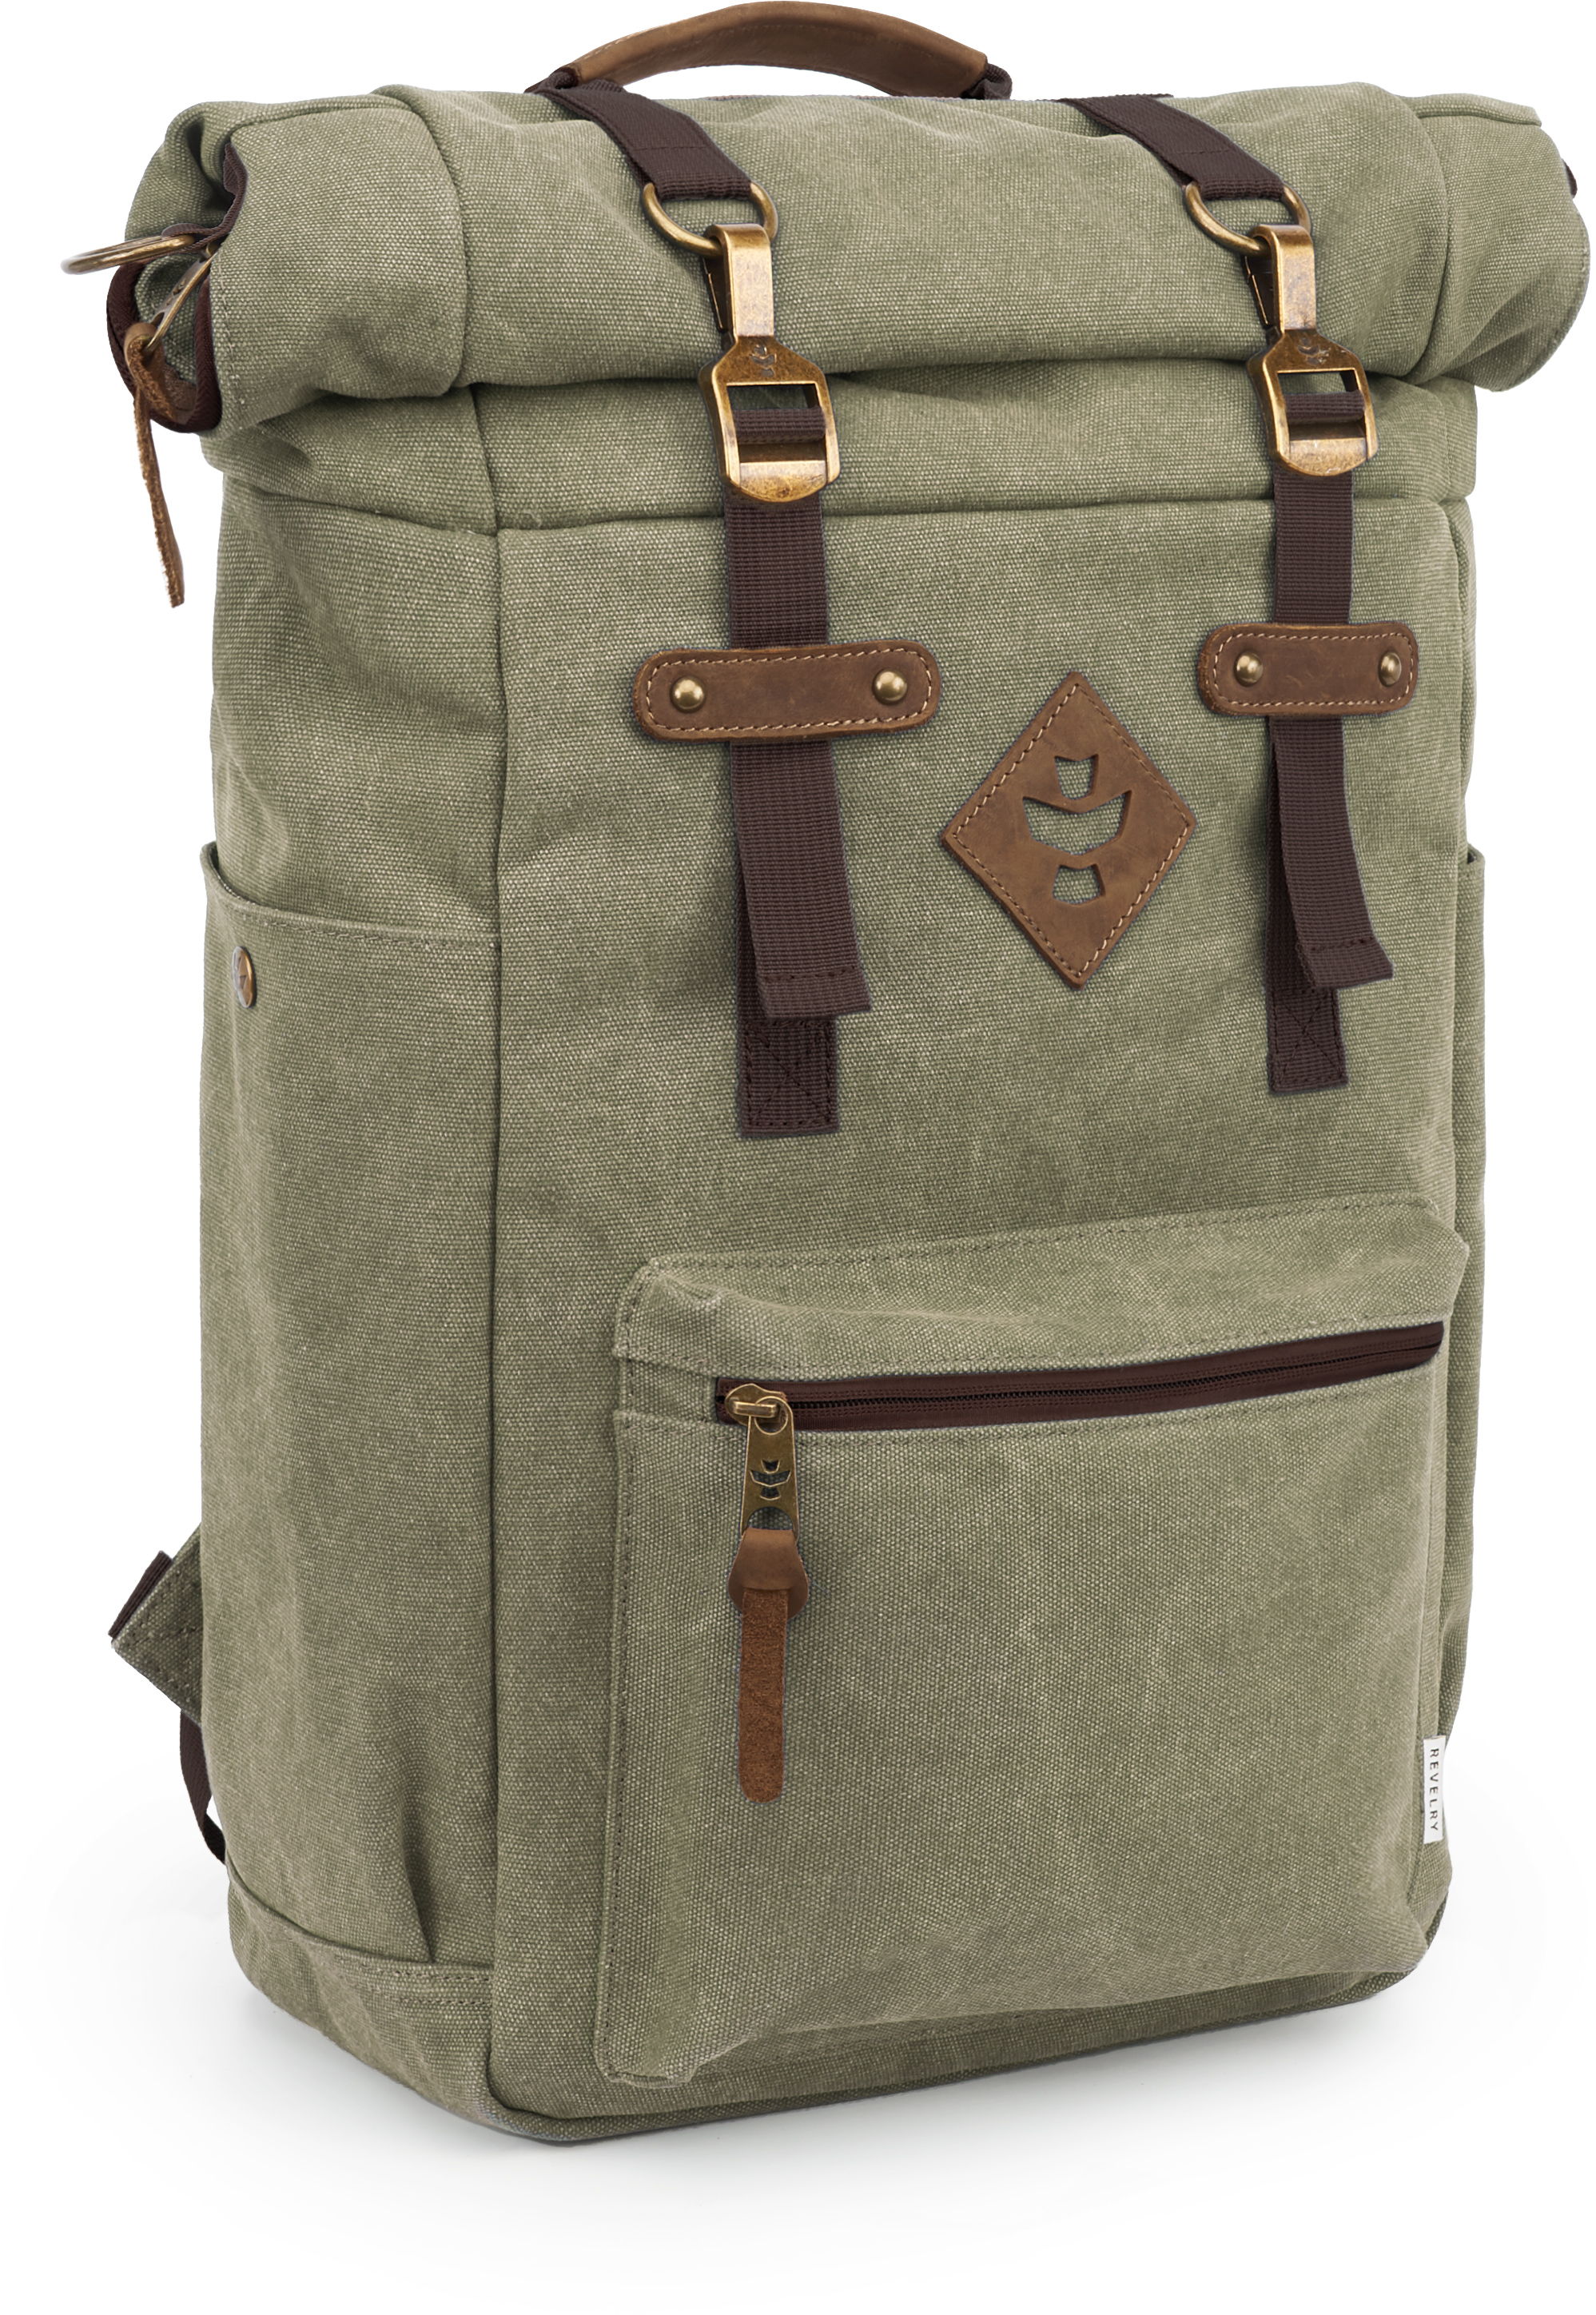 Picture for Revelry Supply The Drifter Rolltop Backpack, Sage